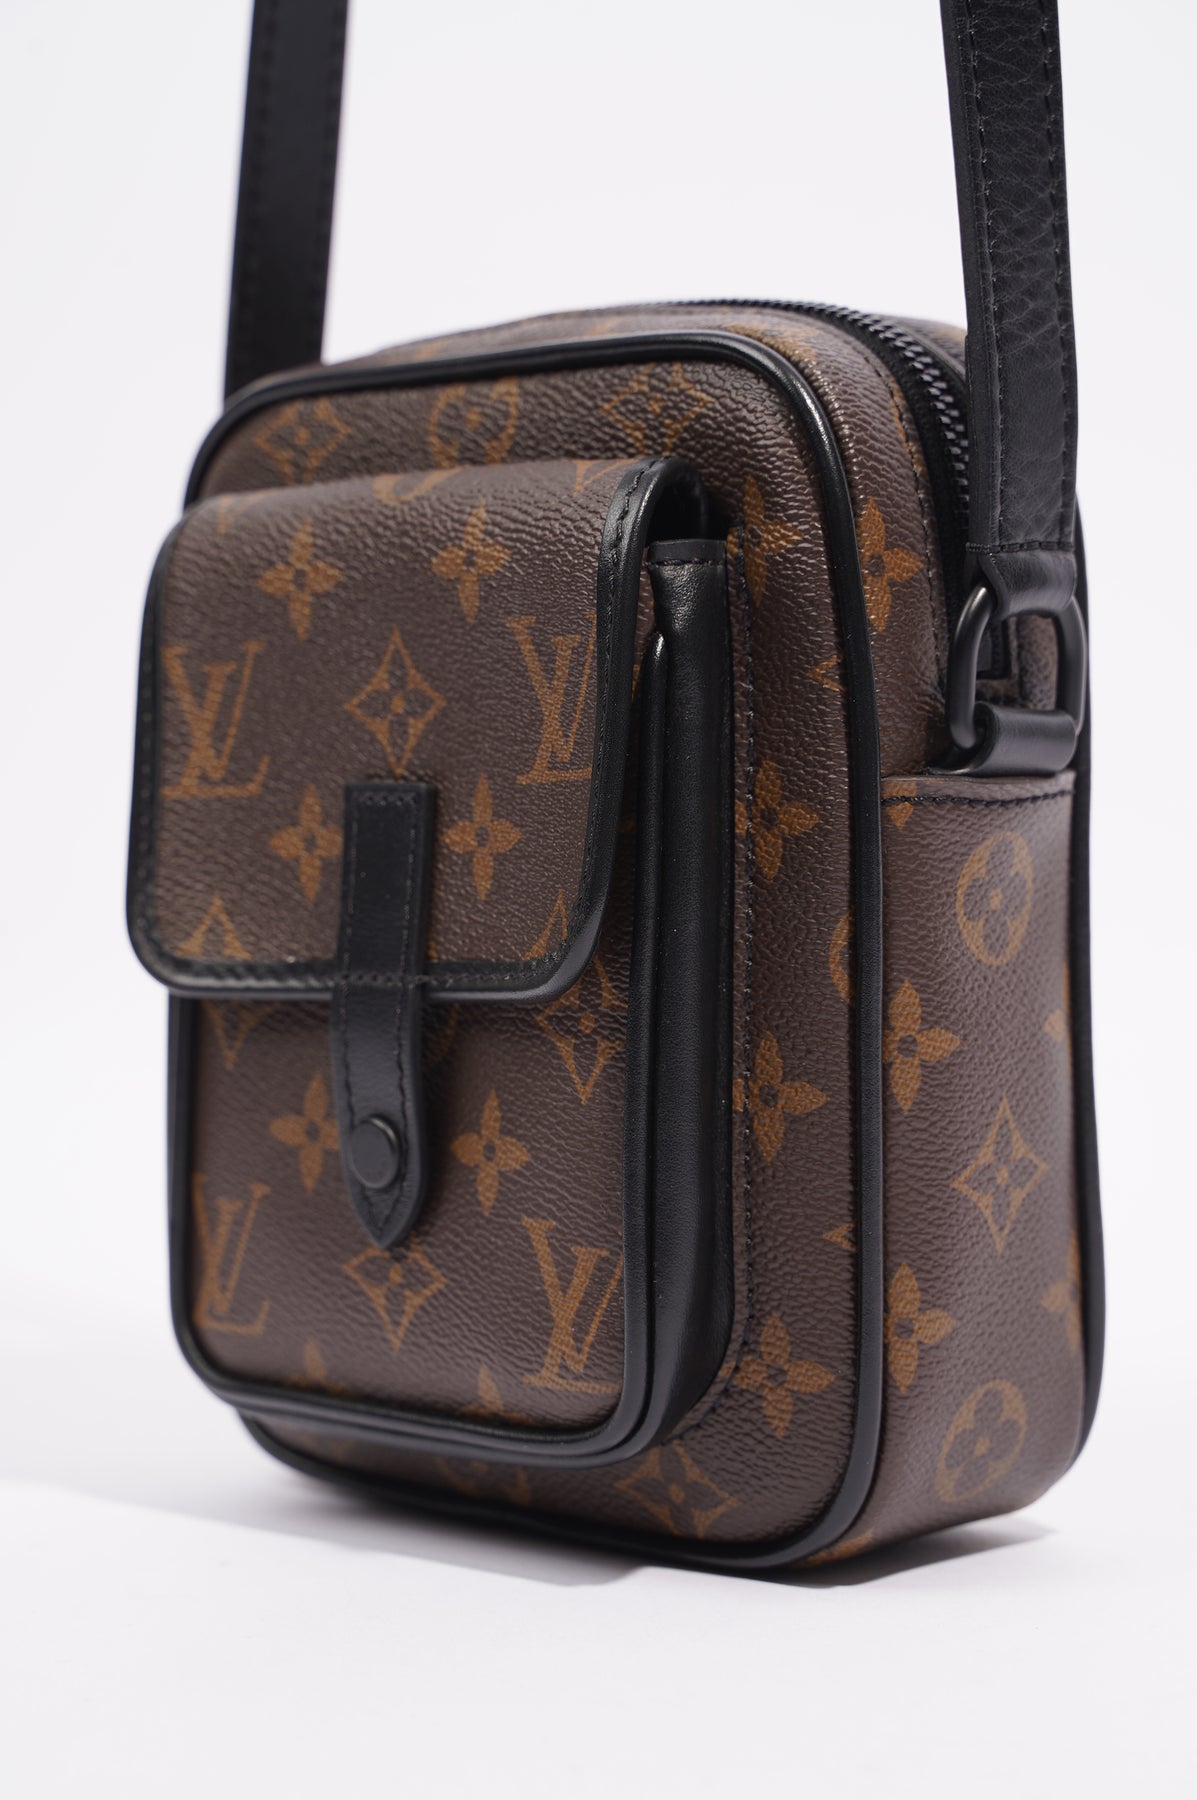 Lv Christopher Wearable Wallet Price Philippines